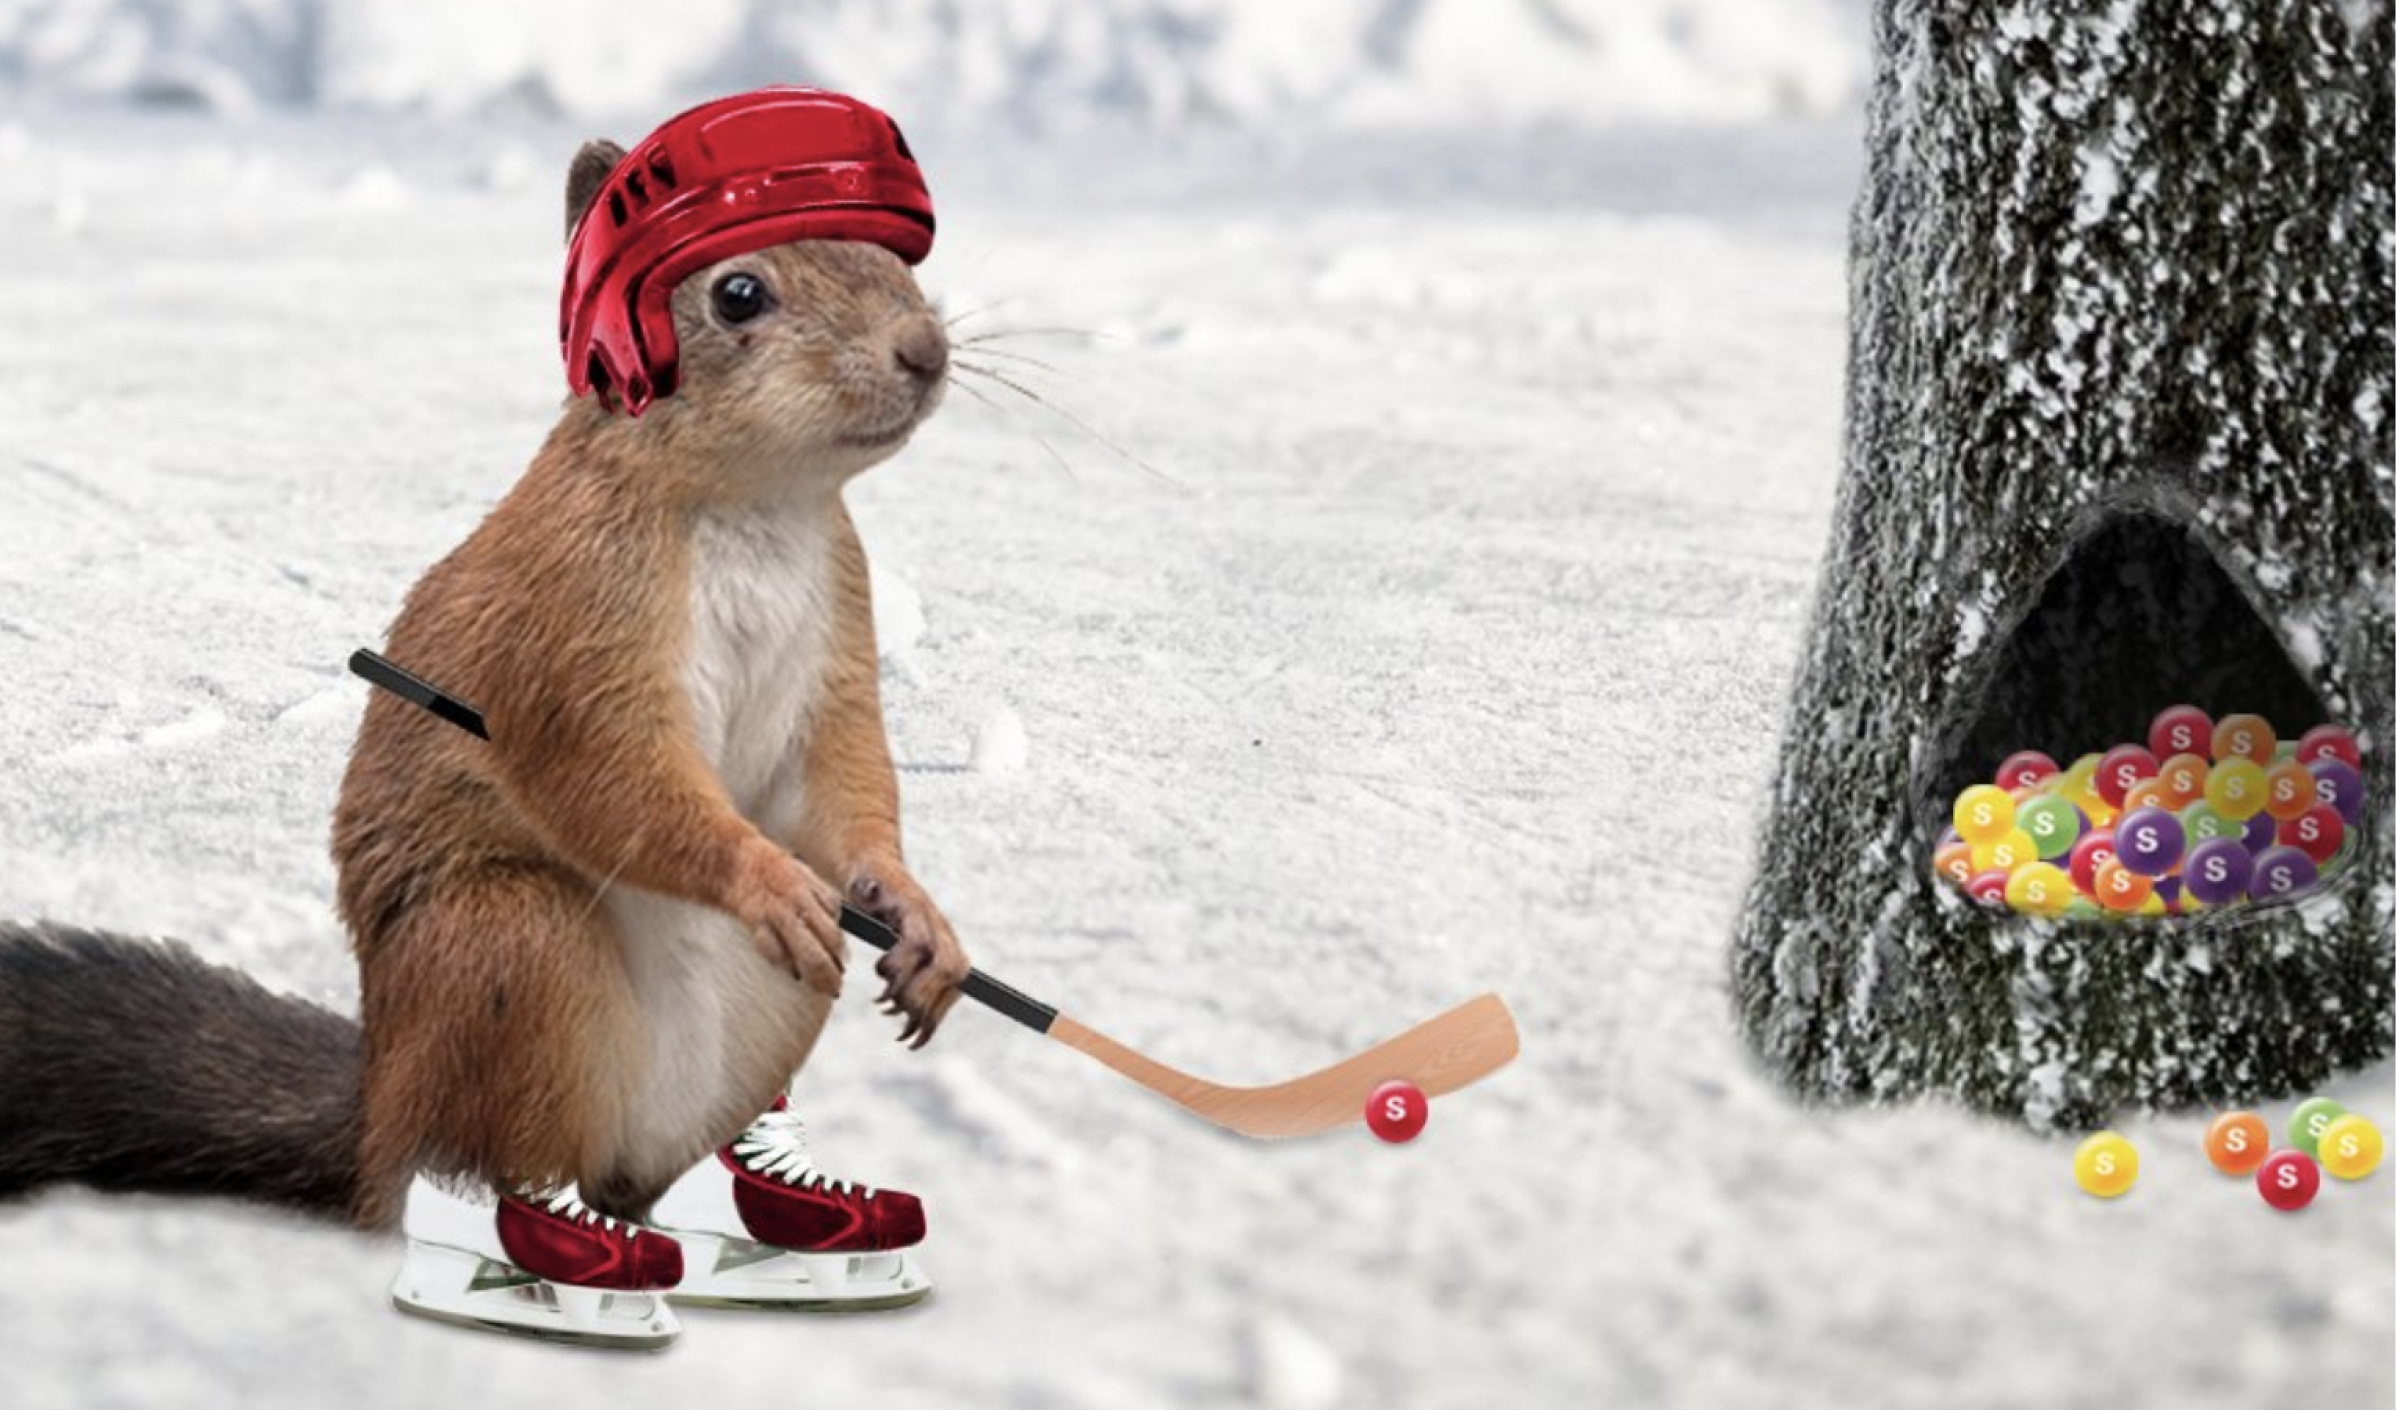 Hockey playing squirrel shooting skittles into a tree like they're pucks 